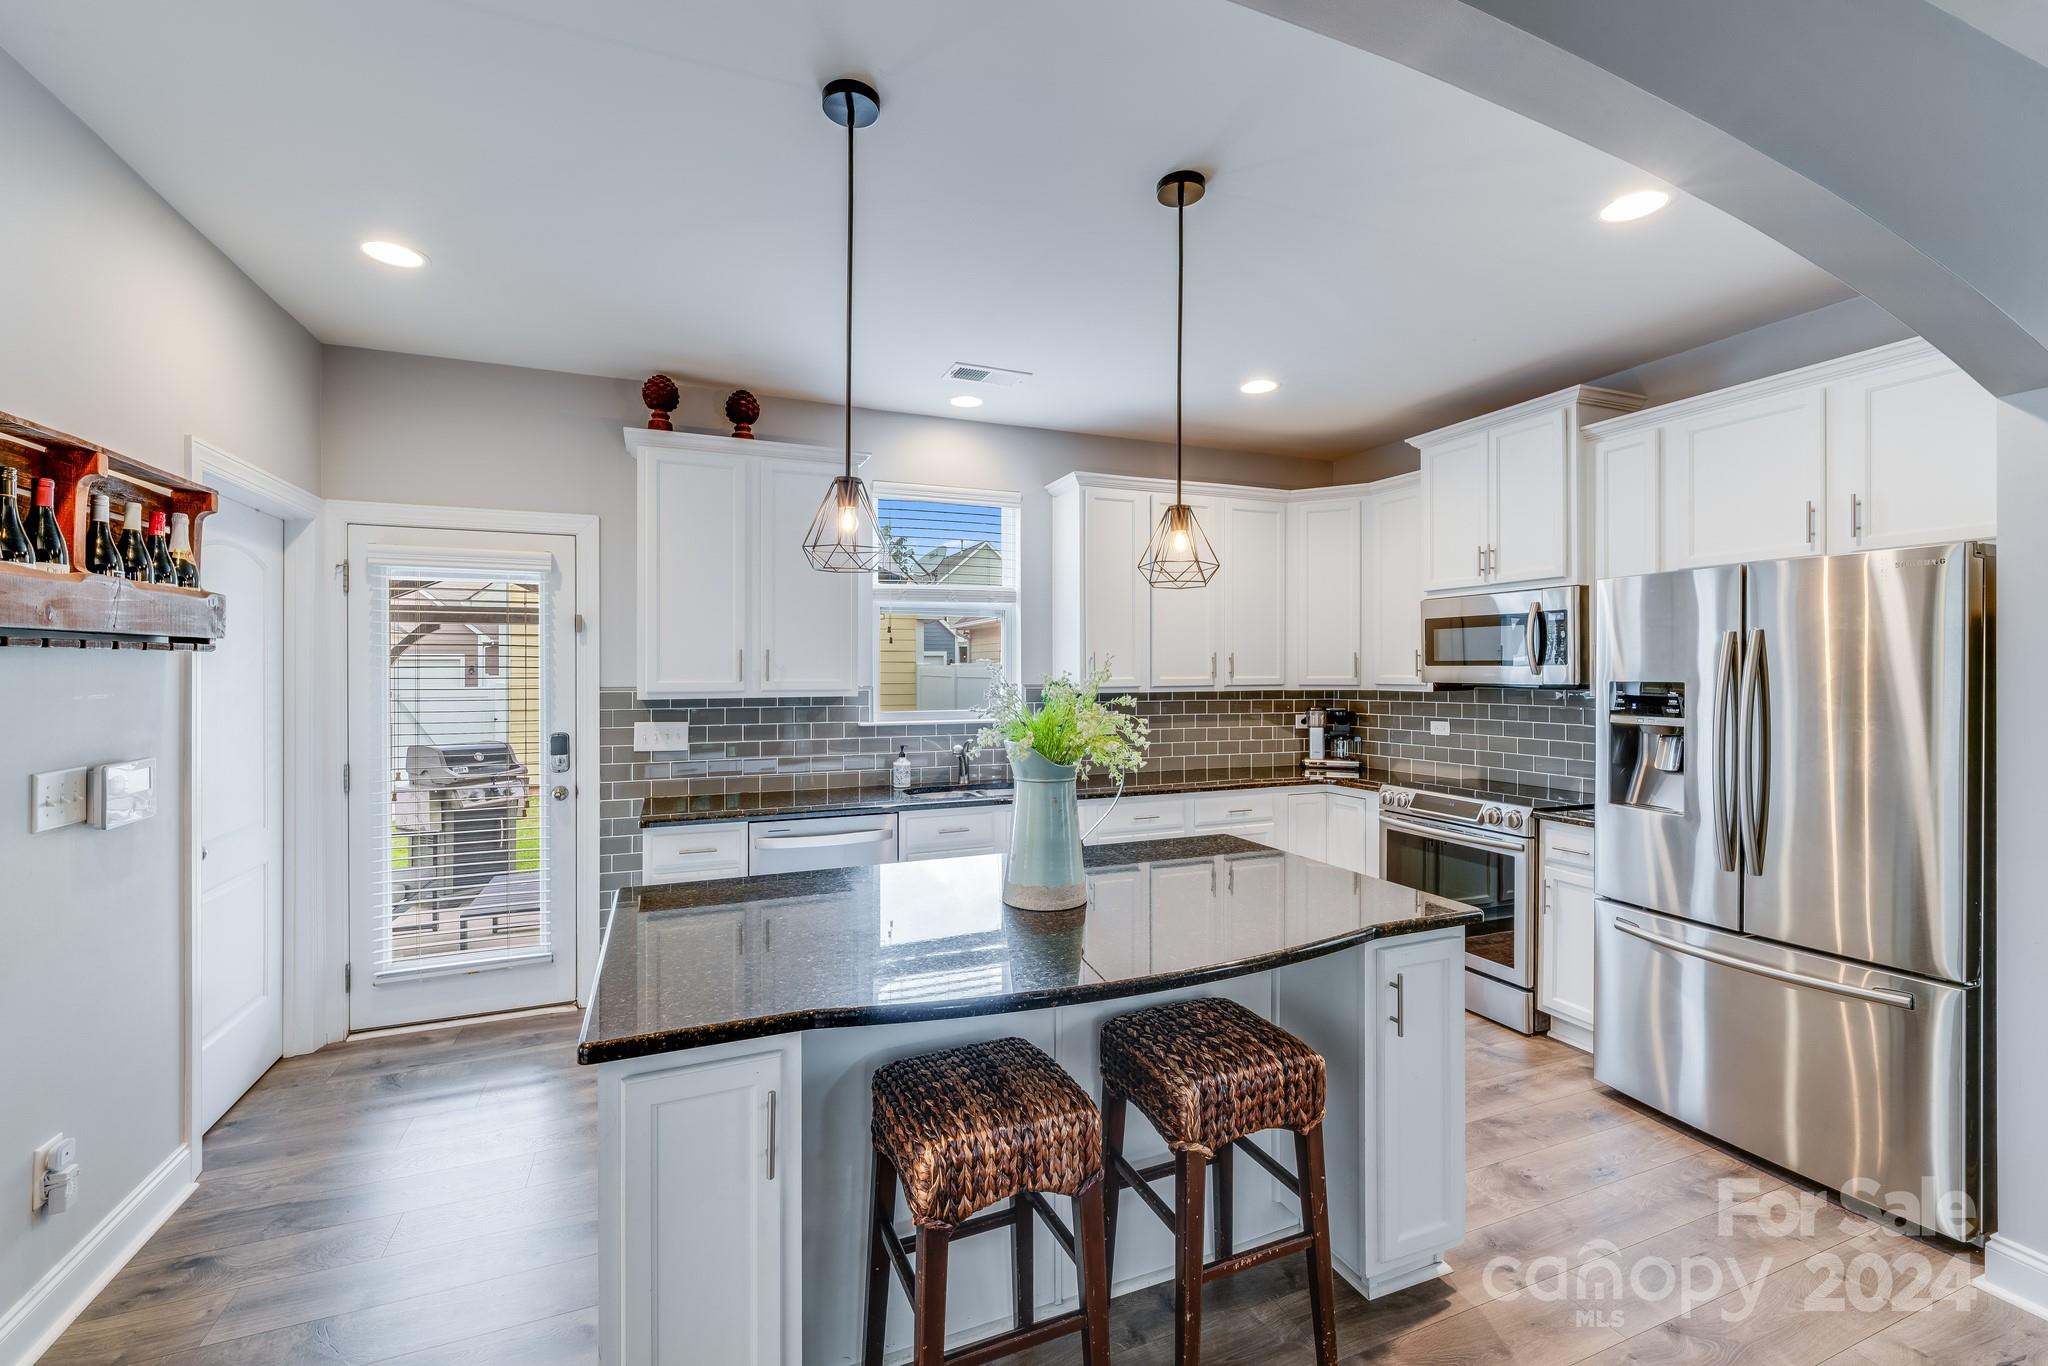 a kitchen with stainless steel appliances granite countertop a refrigerator a stove a sink dishwasher a refrigerator and a dining table with wooden floor